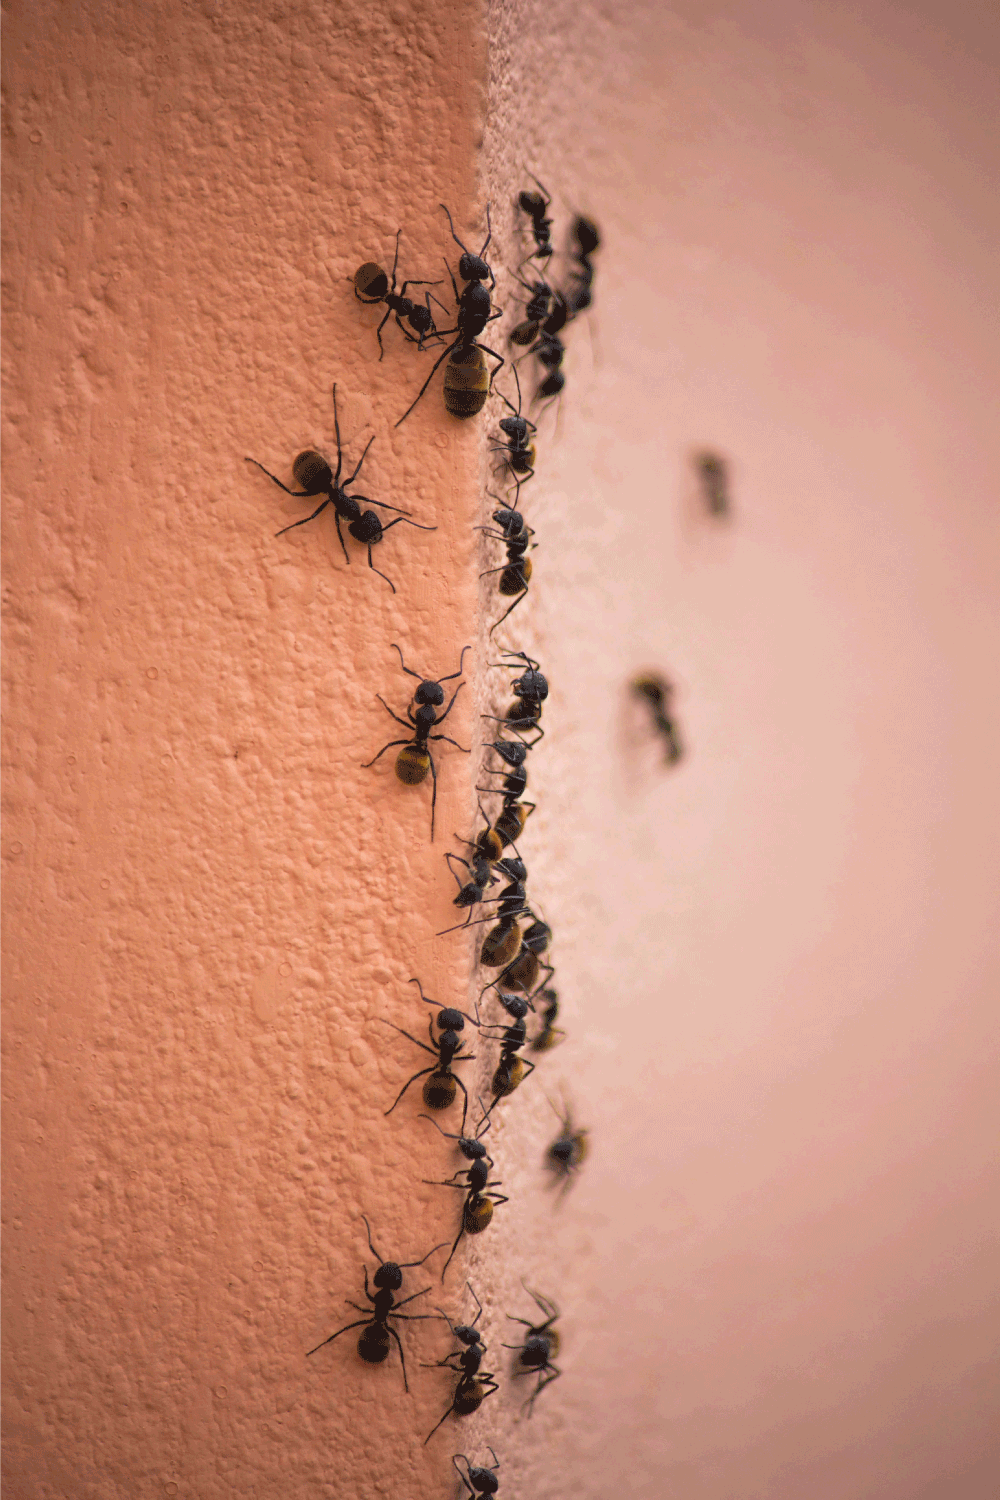 ants climbing up and down the concrete wall